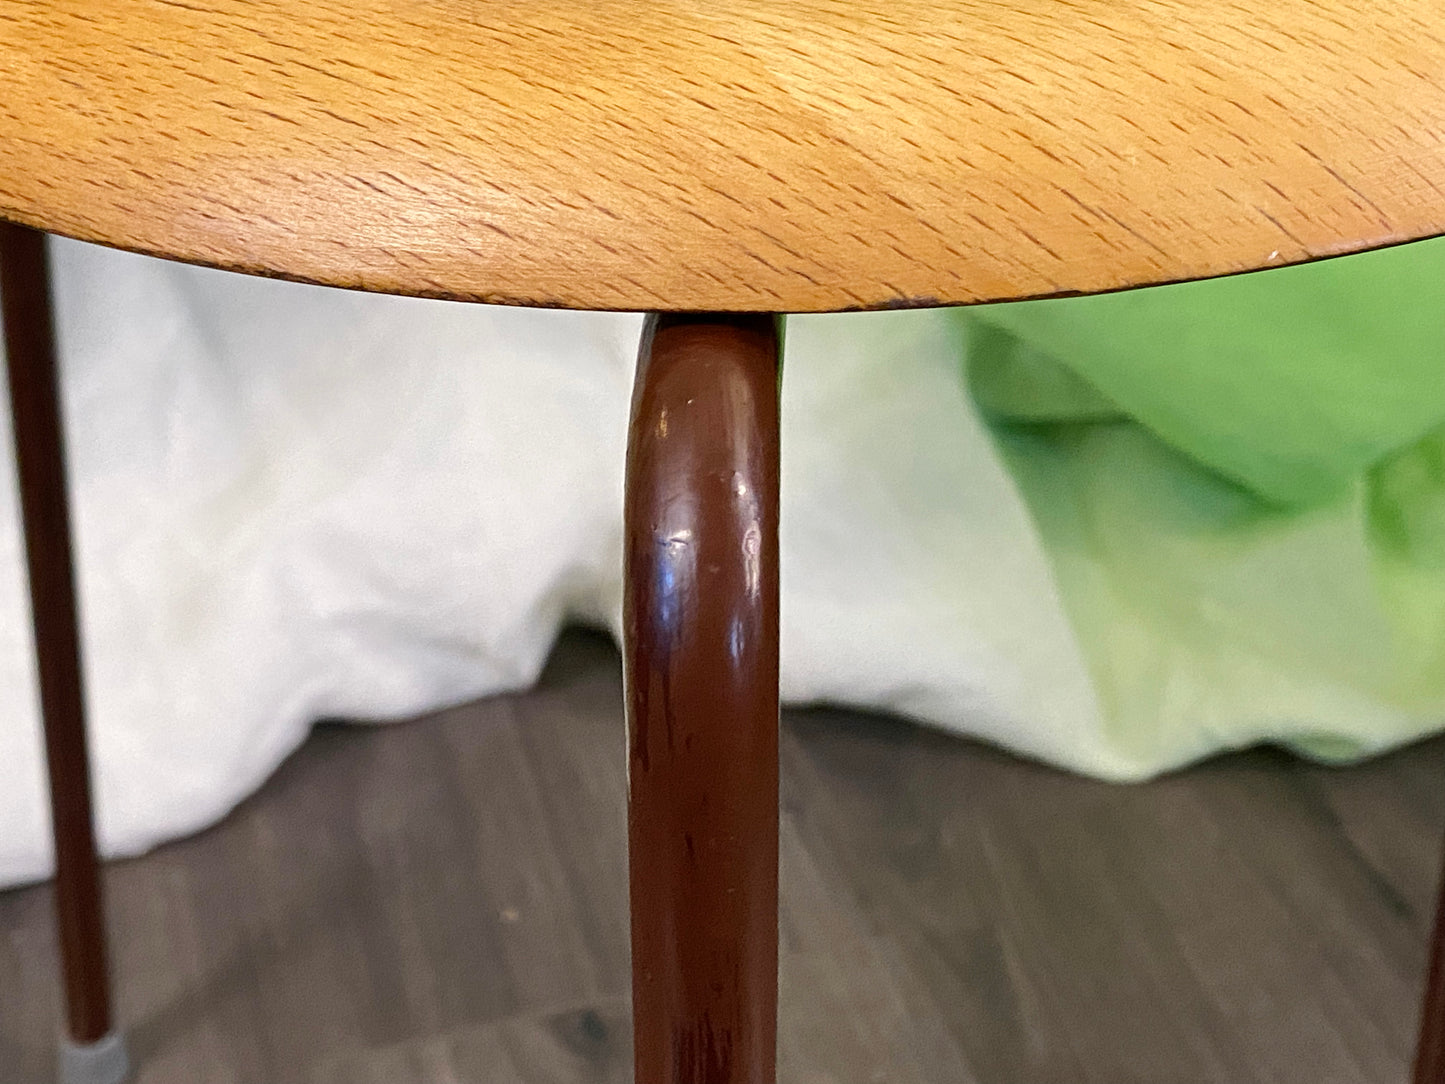 Rare Early Tripod Dot Stool by Fritz Hansen - Teak and Painted Metal - Denmark 1960s